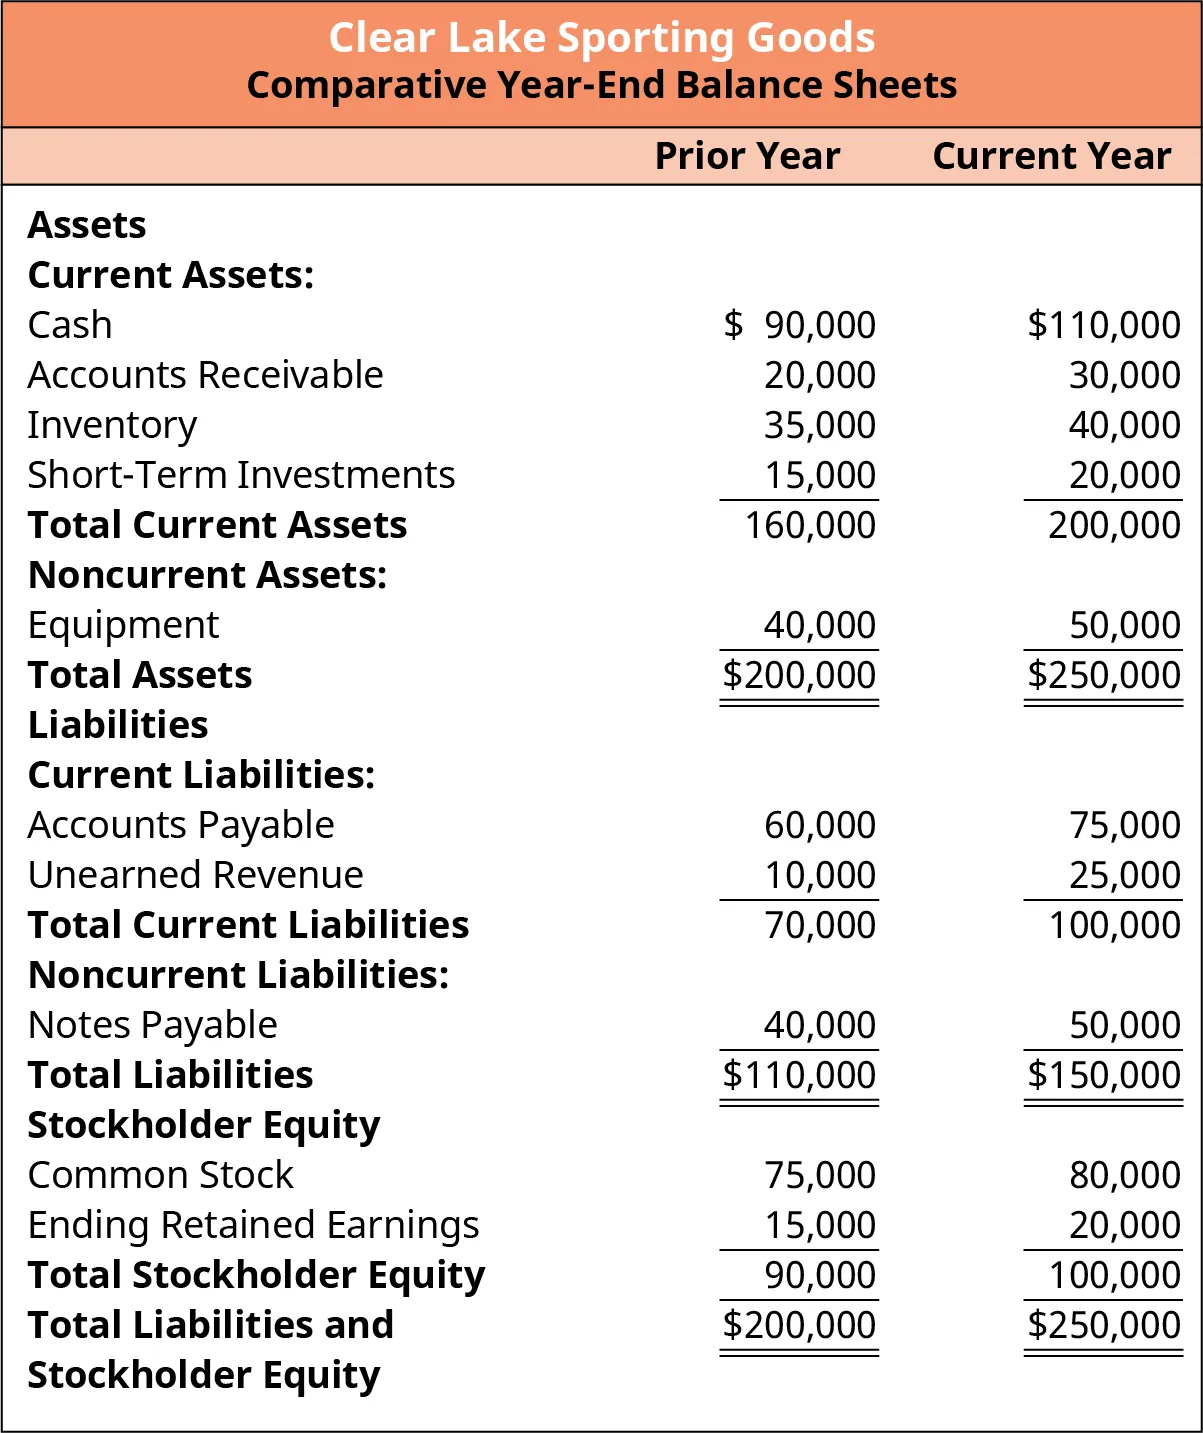 A comparative year-end balance sheet of Clear Lake Sporting Goods shows all of the assets, liabilities, and stockholder equity for the prior and current year. In the current year, there are total assets of $250,000, which balances with the total liabilities and stockholder equity of $250,000.